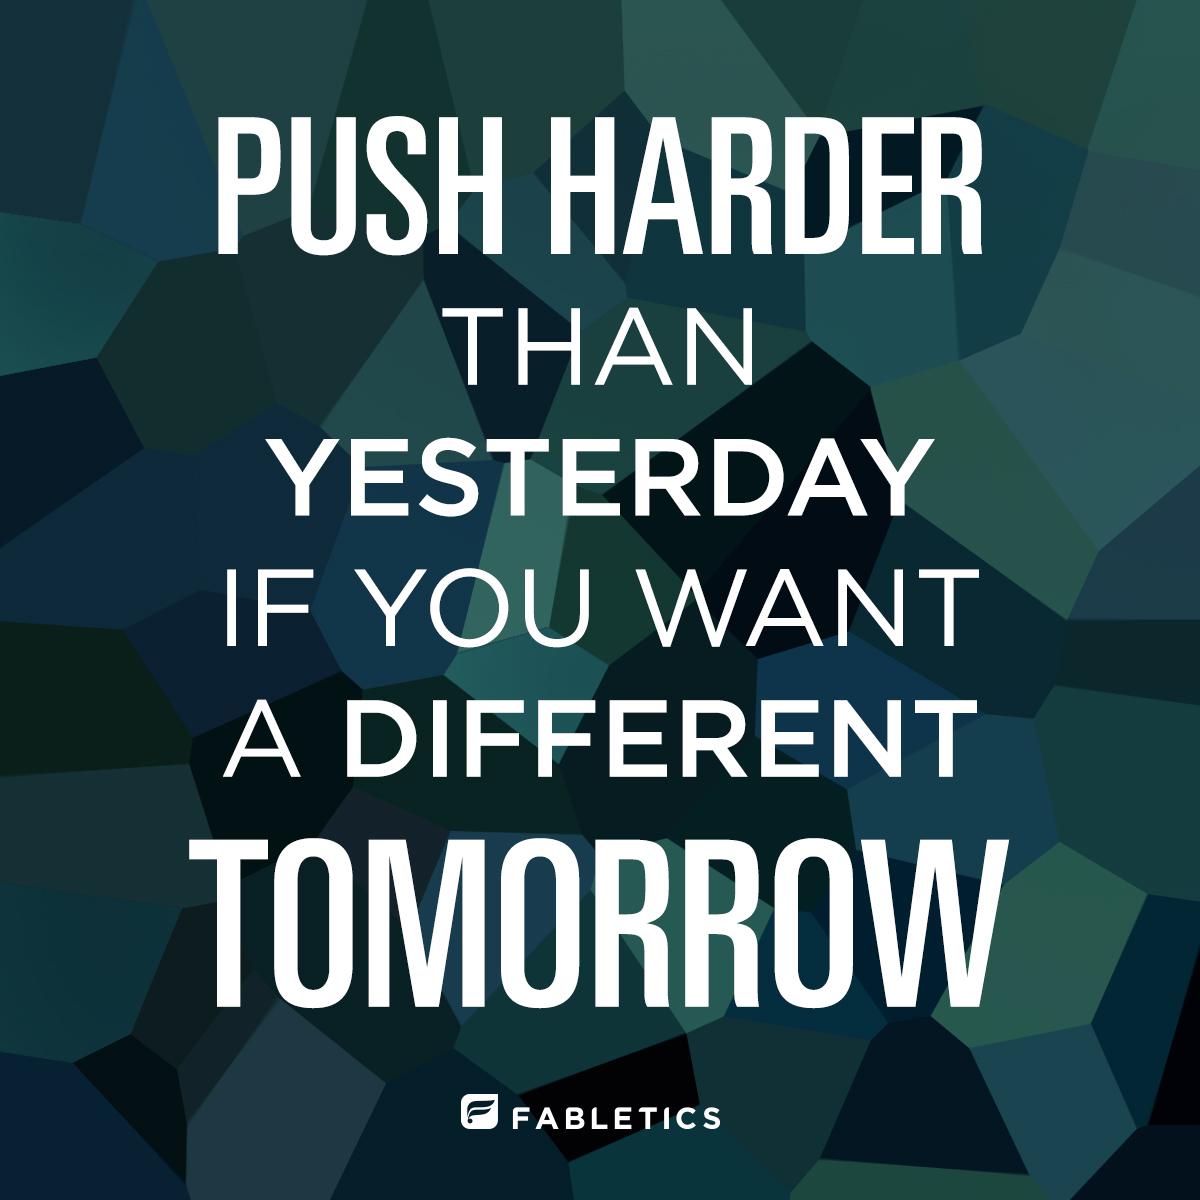 44 Inspirational Workout Quotes with Pictures to Getting You Moving